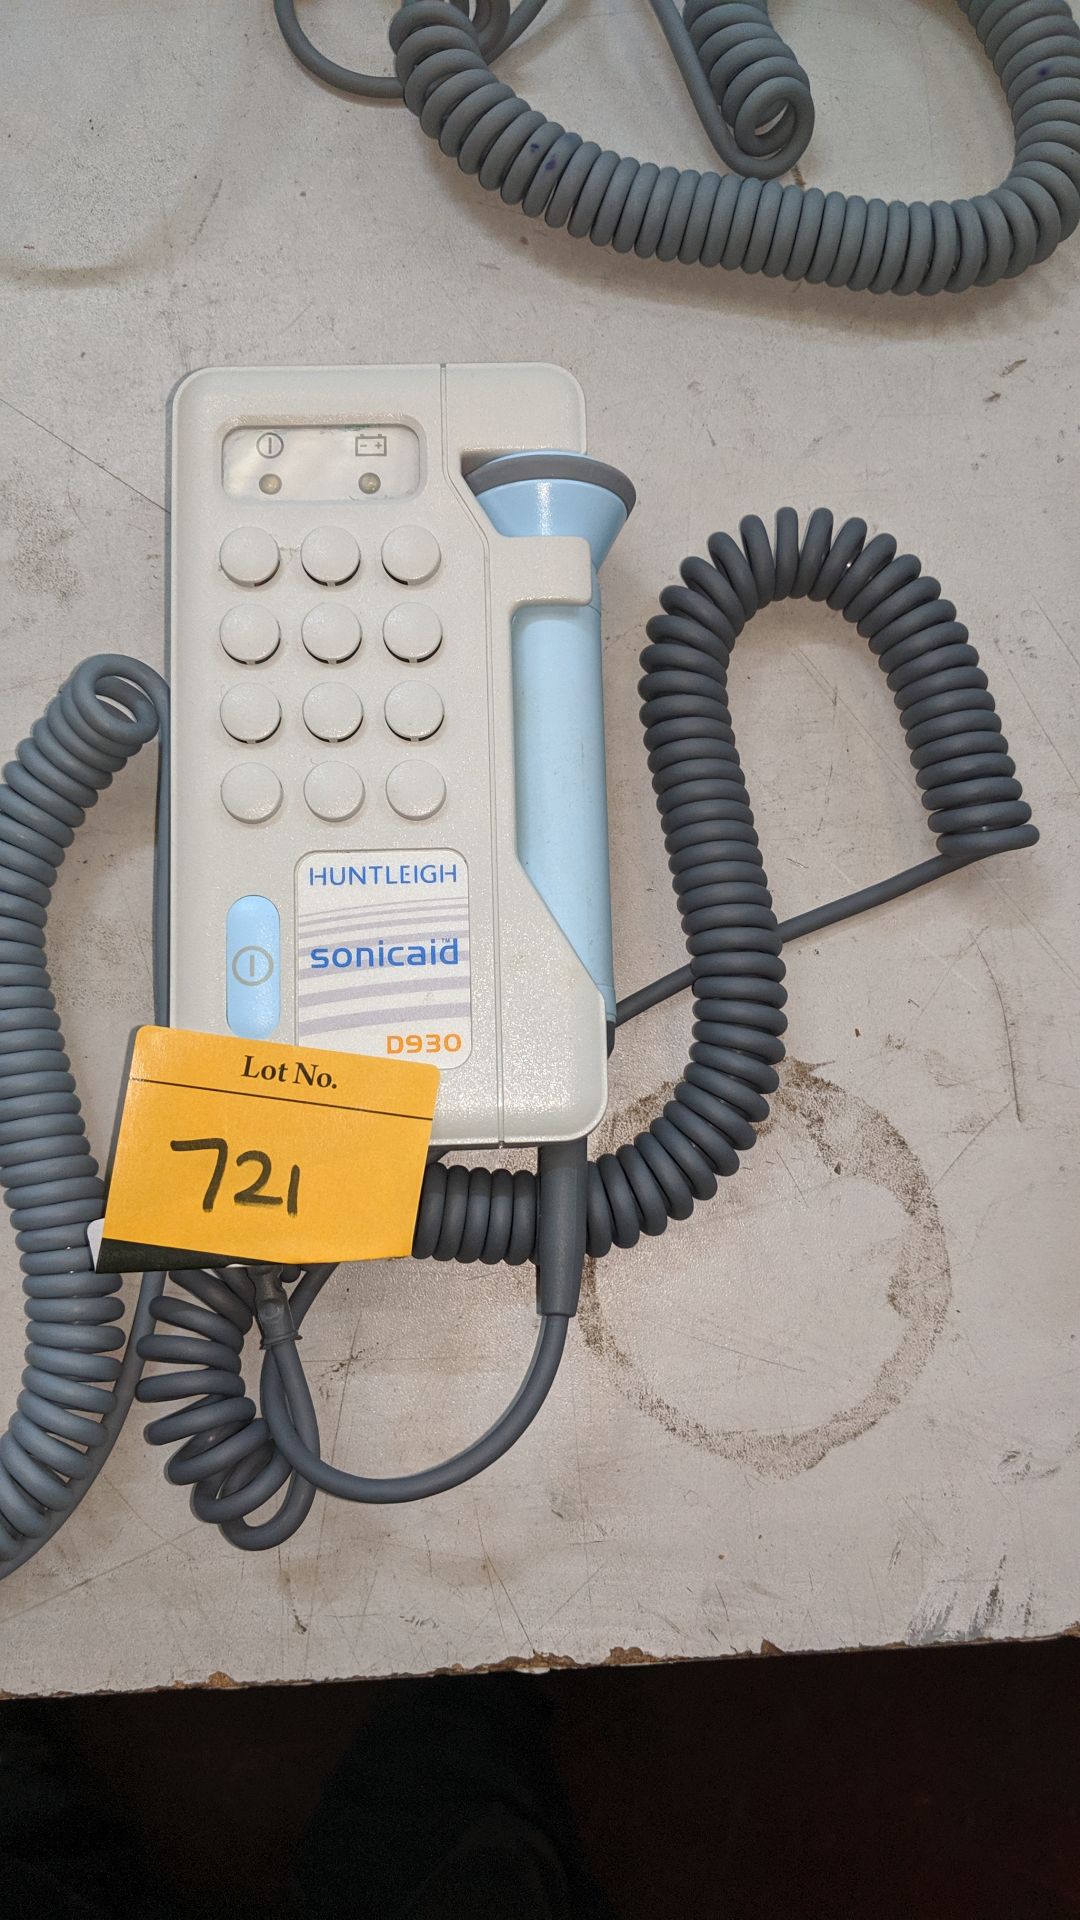 Huntleigh Sonicaid D930 Fetal Doppler tester. This is one of a large number of lots used/owned by - Image 2 of 4